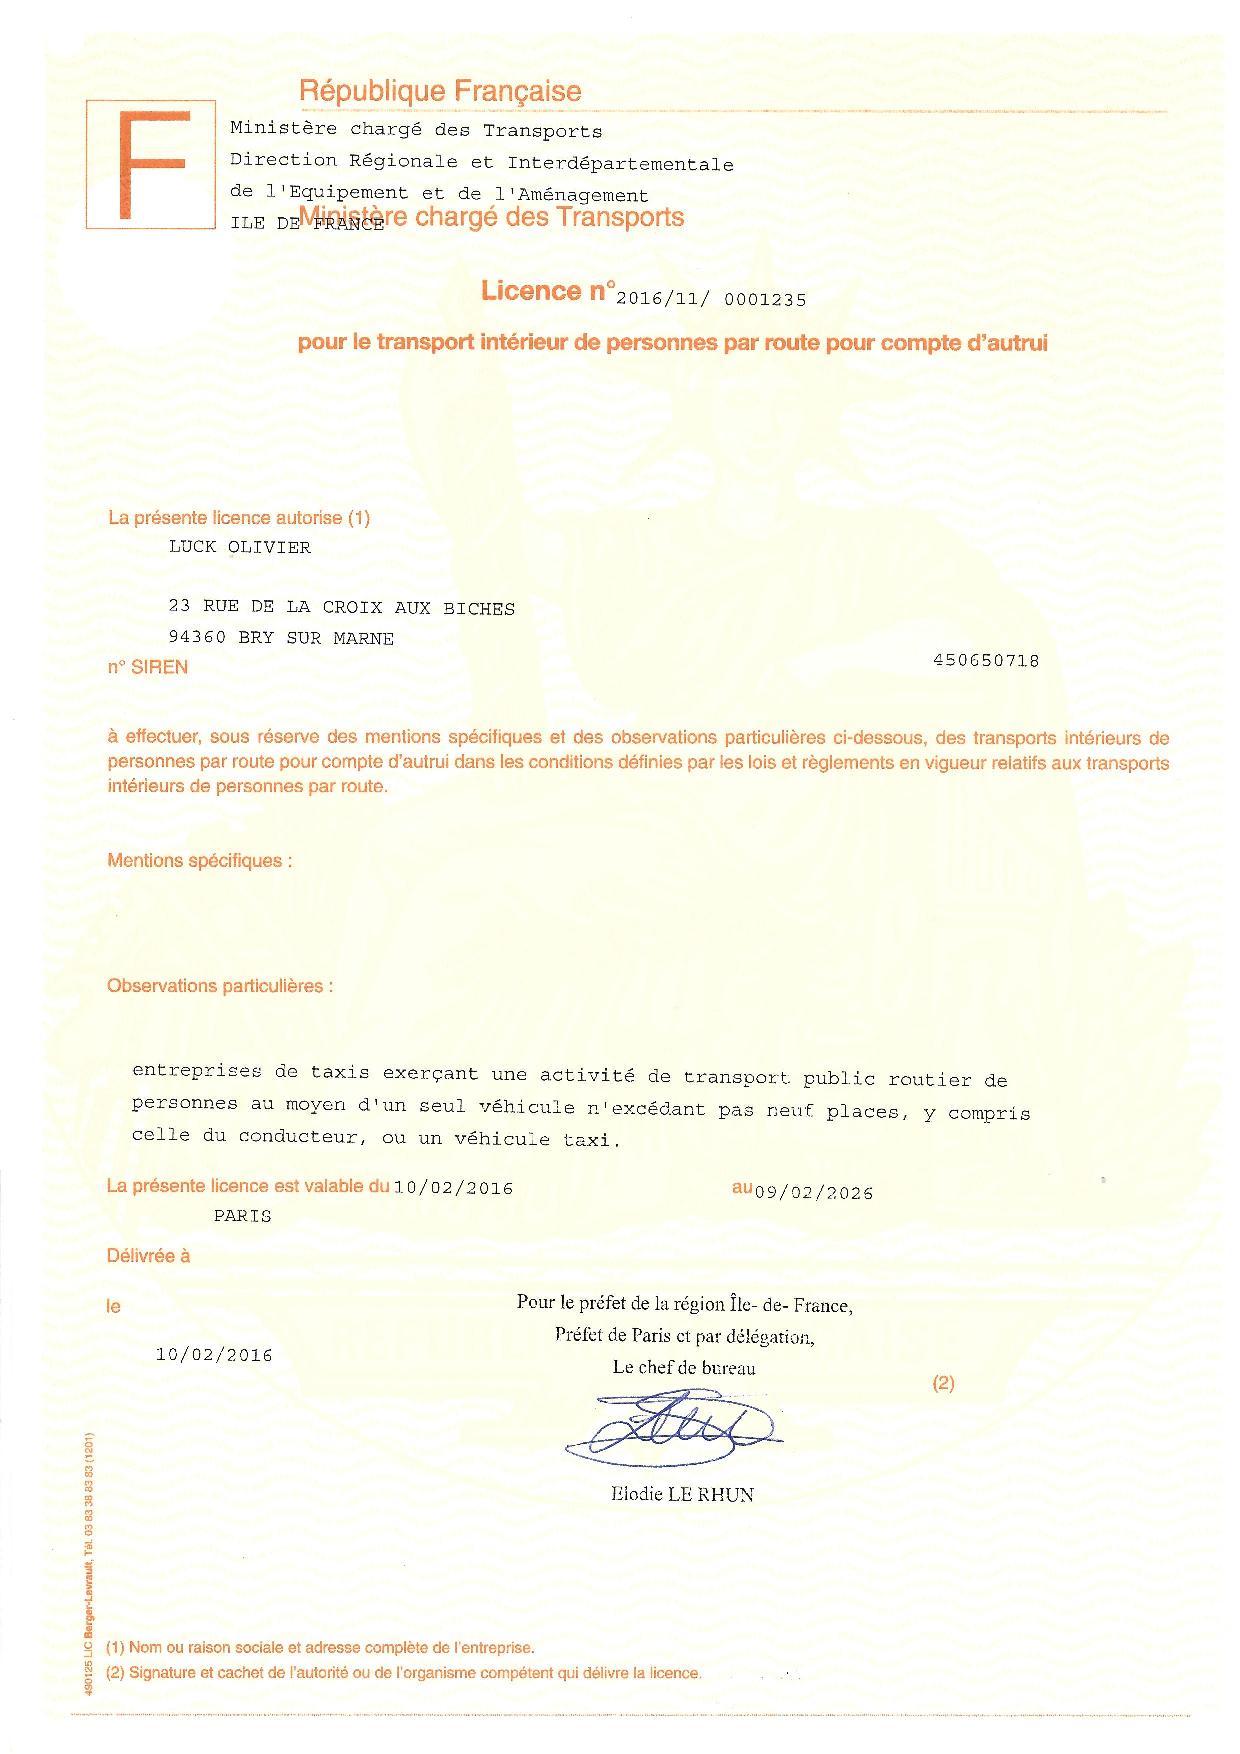 Transport License to carry passengers in France